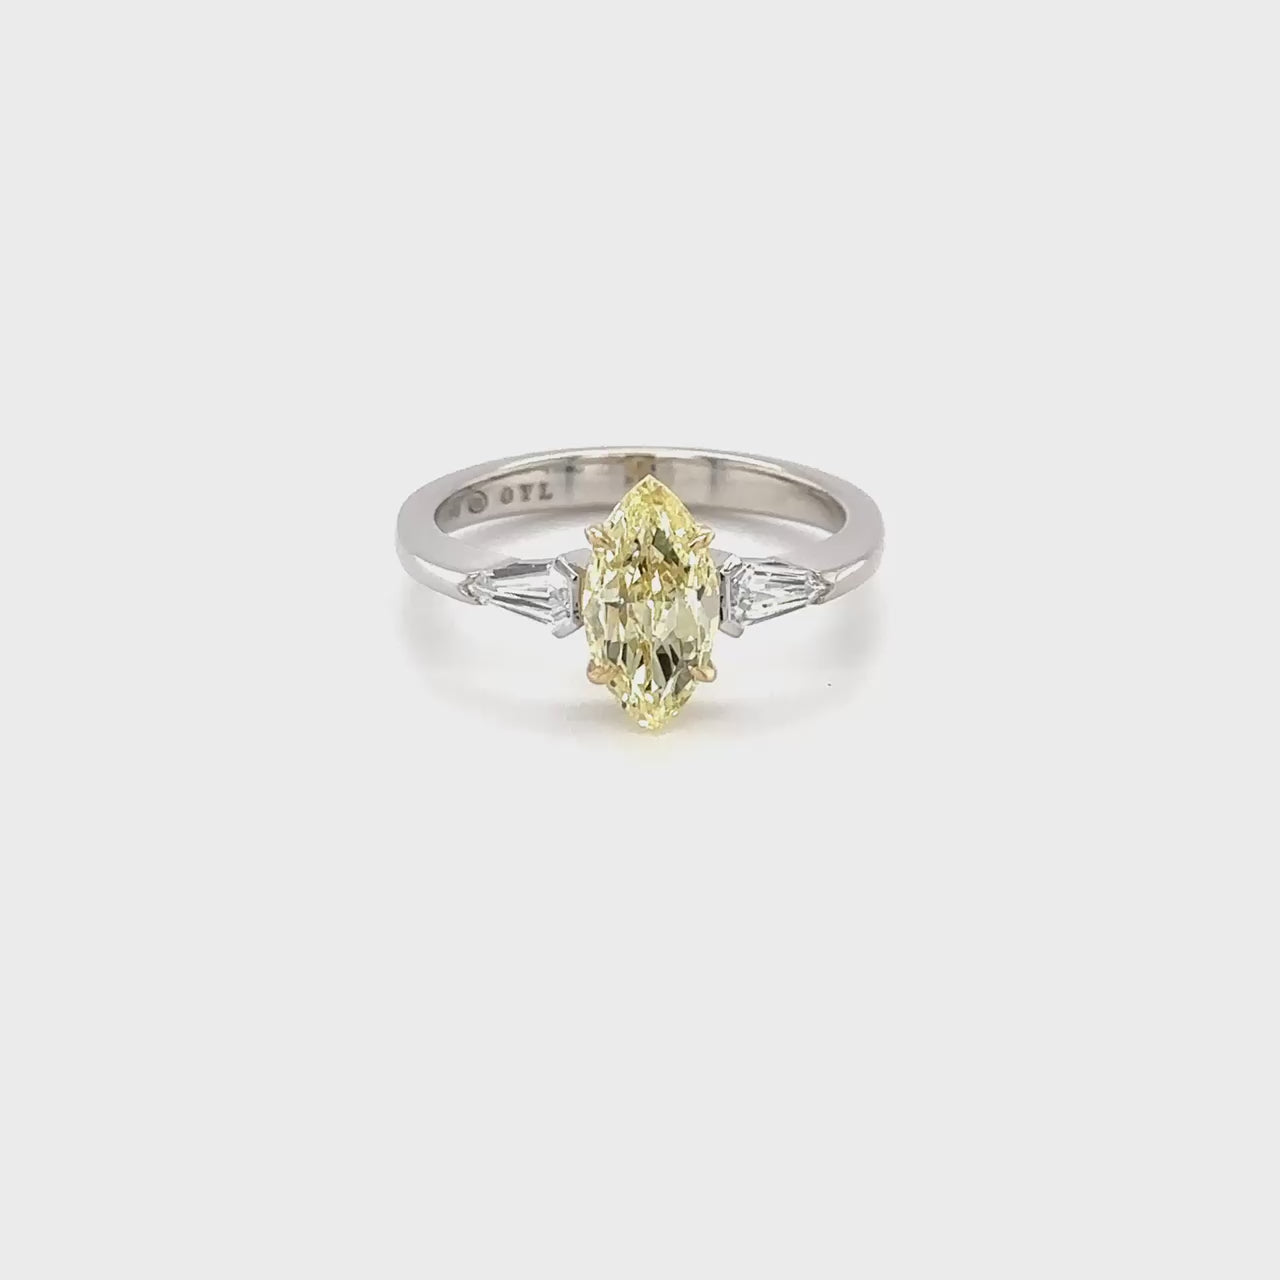 A breathtaking Marquise Cut diamond takes center stage, flanked by two exquisite Triangle Cut diamonds in a captivating Trilogy design. Crafted with precision and elegance, this ring exudes timeless beauty and sophistication, destined to be cherished for a lifetime.